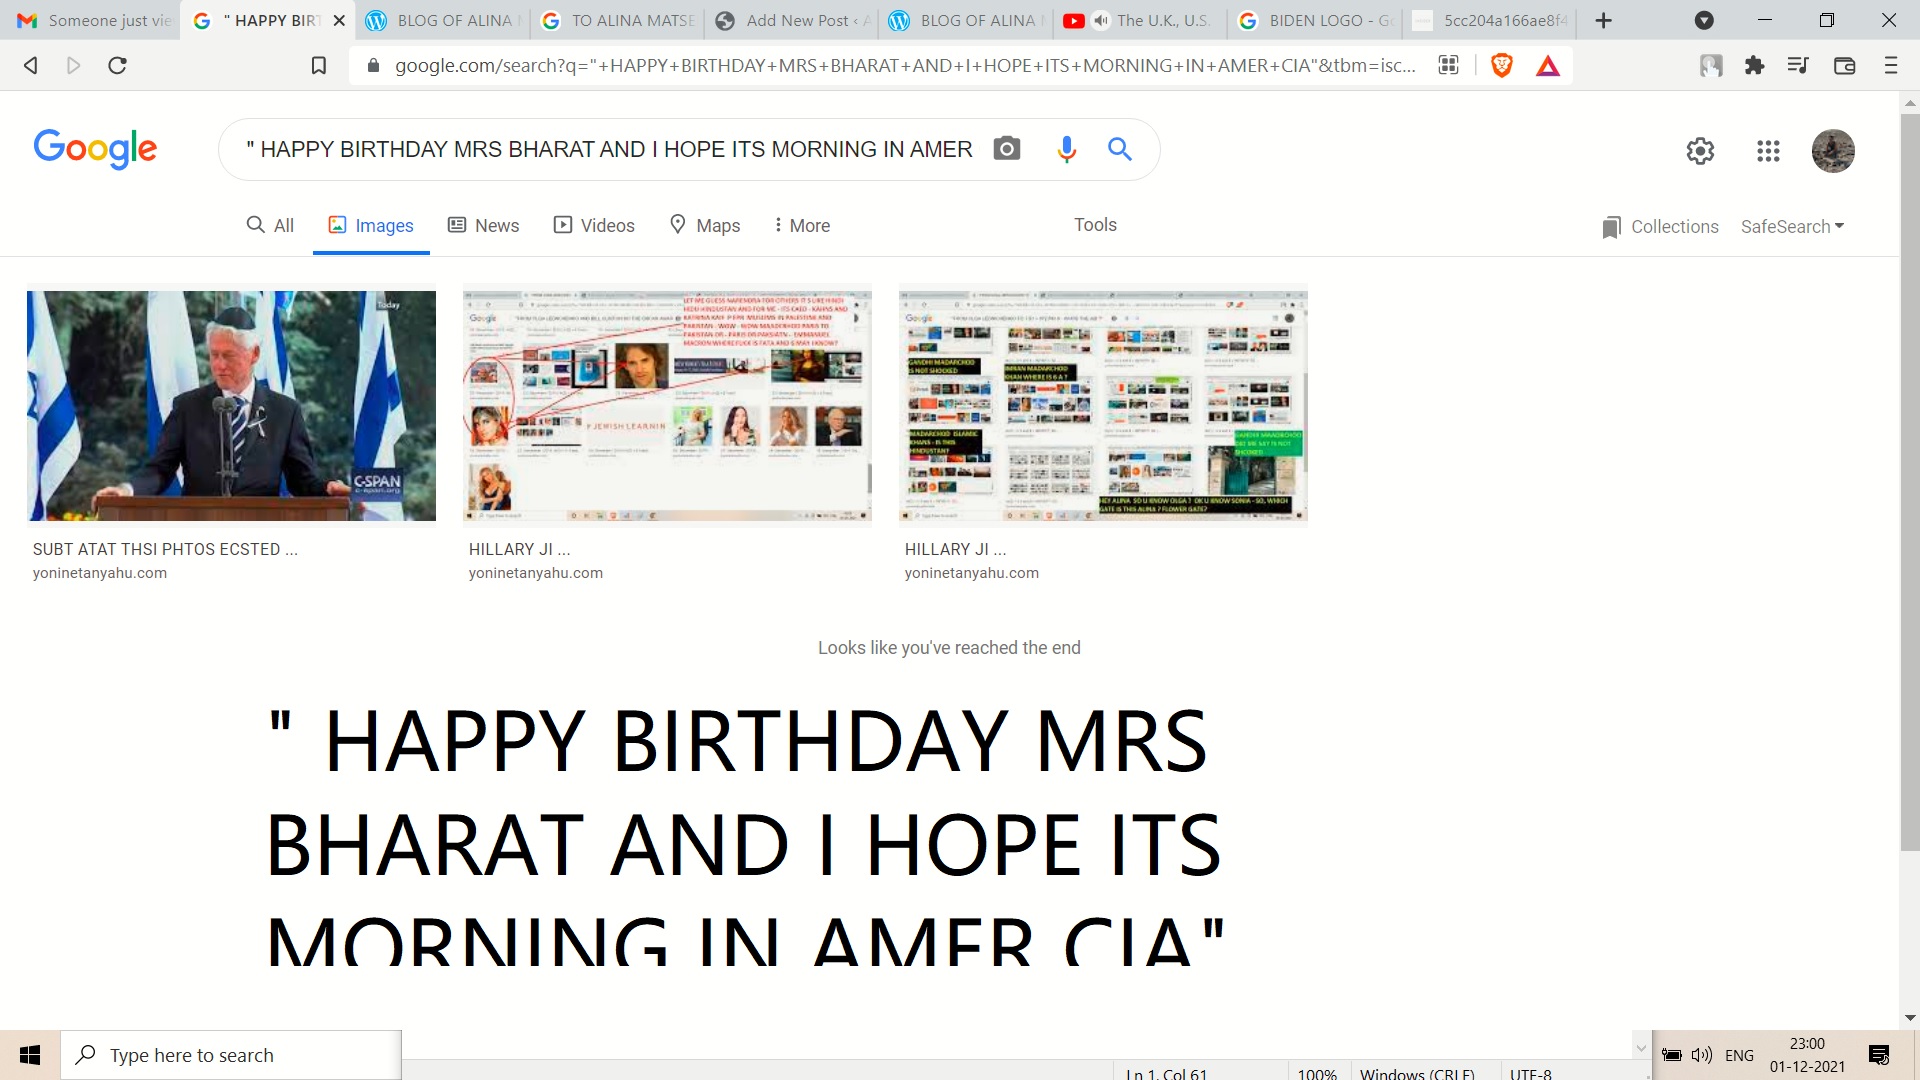 HAPPY BIRTHDAY MRS BHARAT AND I HOPE ITS MORNING IN AMER CIA